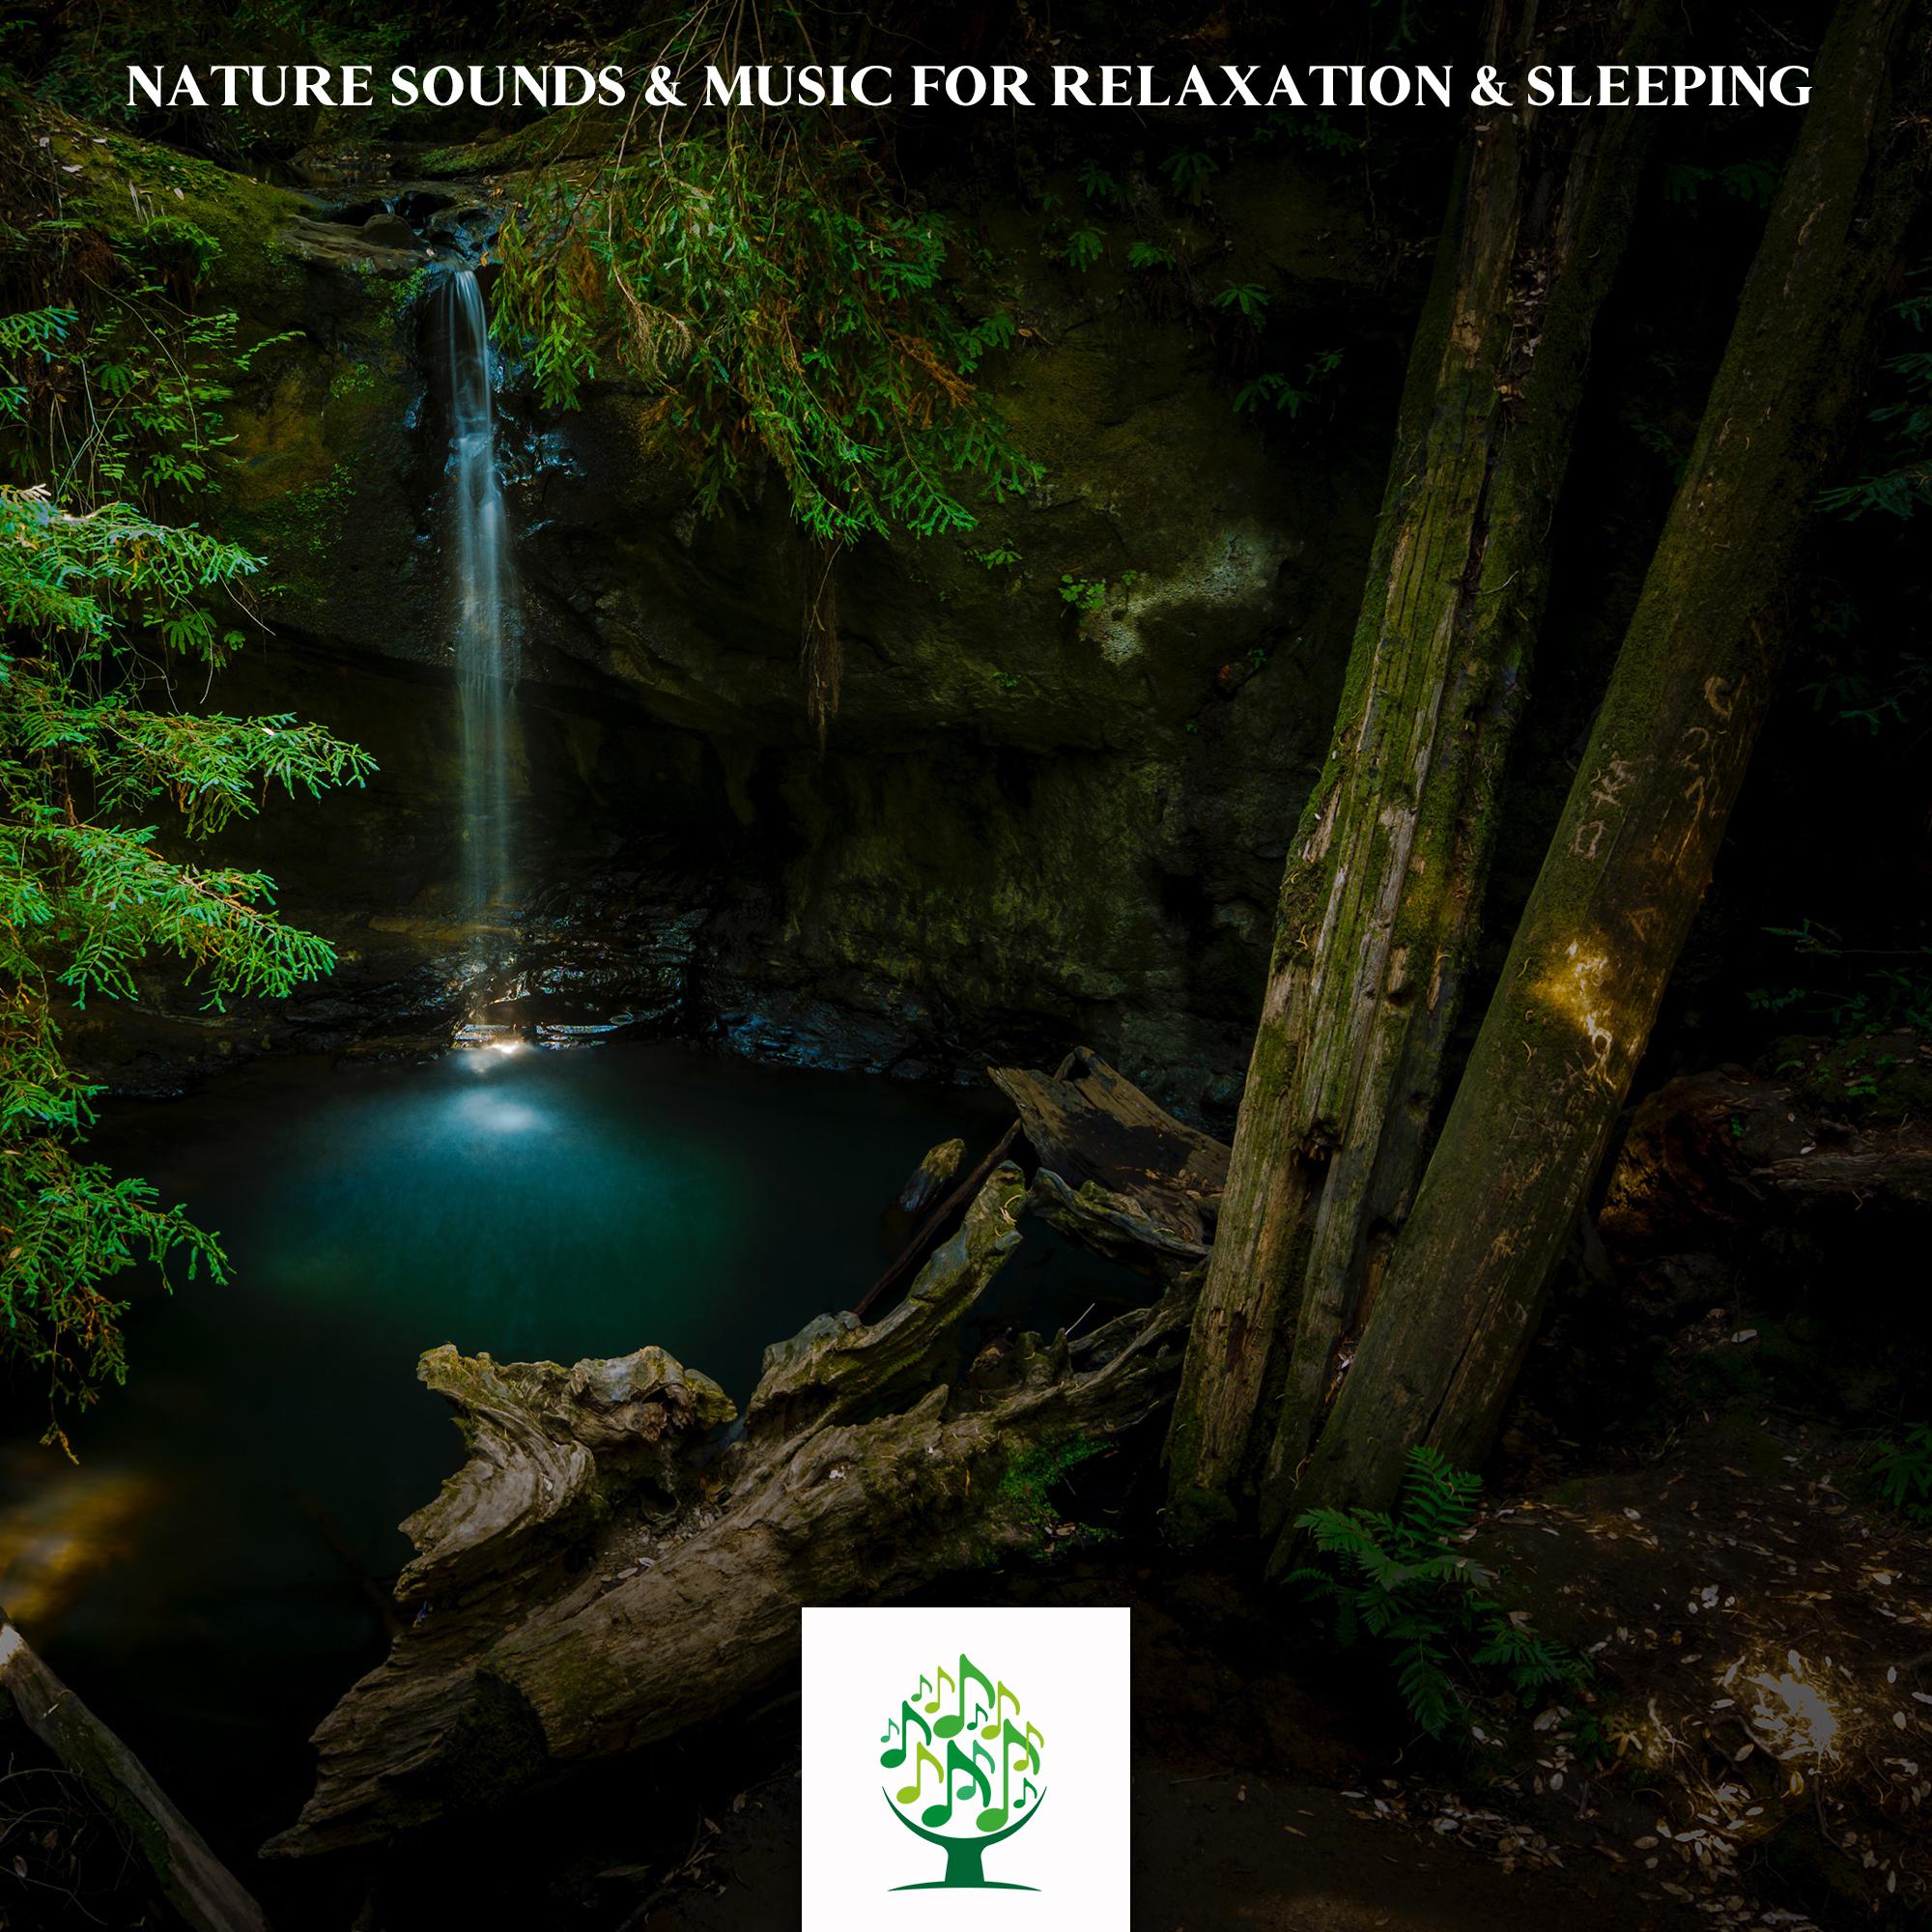 Nature Sounds & Music for Relaxation & Sleeping